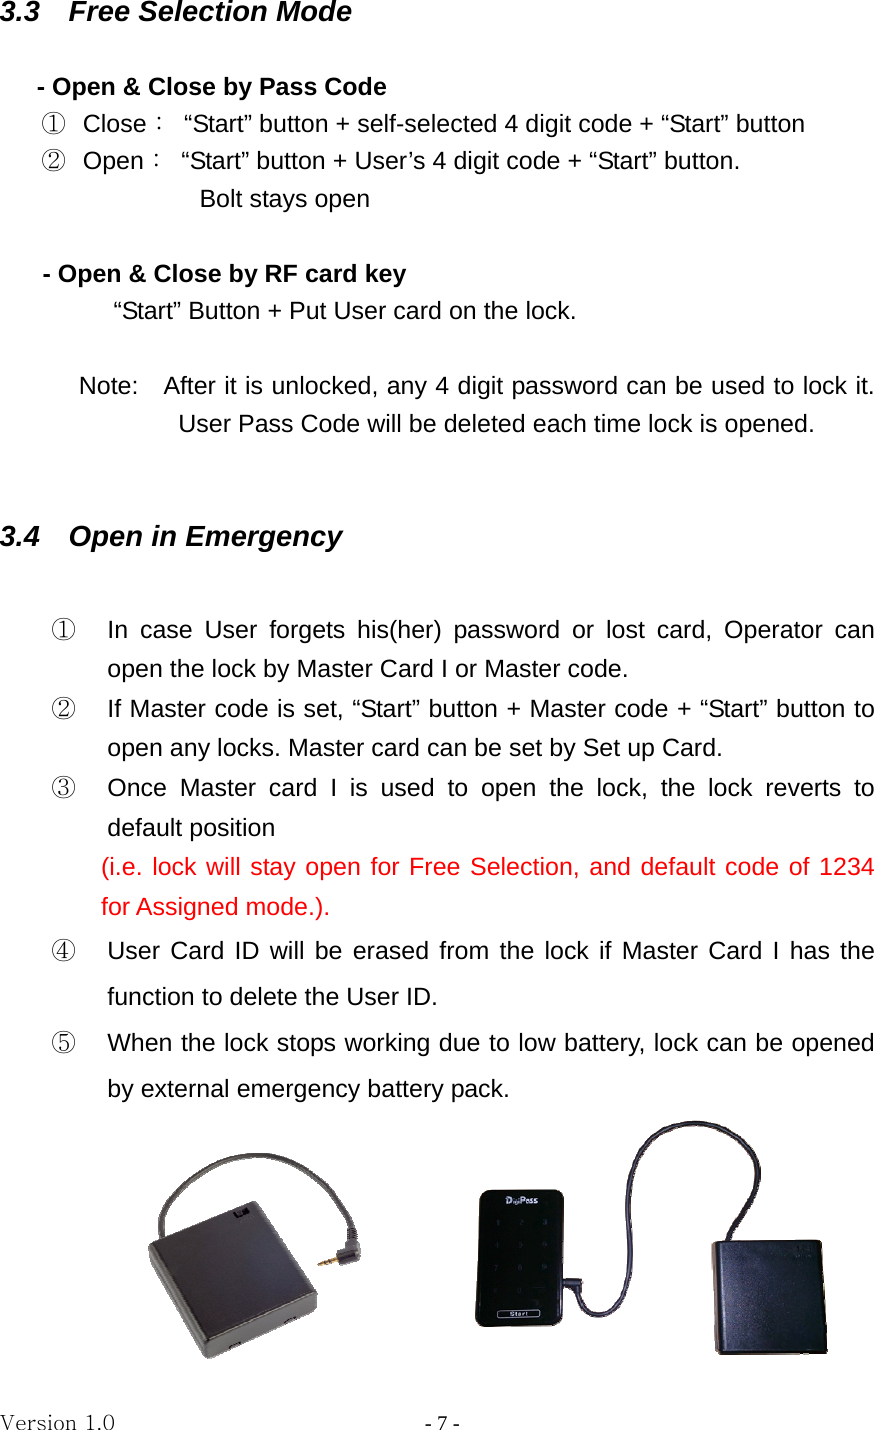 Version 1.0                - 7 - 3.3  Free Selection Mode  - Open &amp; Close by Pass Code ①  Close：  “Start” button + self-selected 4 digit code + “Start” button ② Open：  “Start” button + User’s 4 digit code + “Start” button. Bolt stays open        - Open &amp; Close by RF card key “Start” Button + Put User card on the lock.  Note:    After it is unlocked, any 4 digit password can be used to lock it. User Pass Code will be deleted each time lock is opened.   3.4    Open in Emergency           ①  In case User forgets his(her) password or lost card, Operator can open the lock by Master Card I or Master code. ②  If Master code is set, “Start” button + Master code + “Start” button to open any locks. Master card can be set by Set up Card. ③  Once Master card I is used to open the lock, the lock reverts to default position   (i.e. lock will stay open for Free Selection, and default code of 1234 for Assigned mode.). ④  User Card ID will be erased from the lock if Master Card I has the function to delete the User ID.   ⑤  When the lock stops working due to low battery, lock can be opened by external emergency battery pack.      